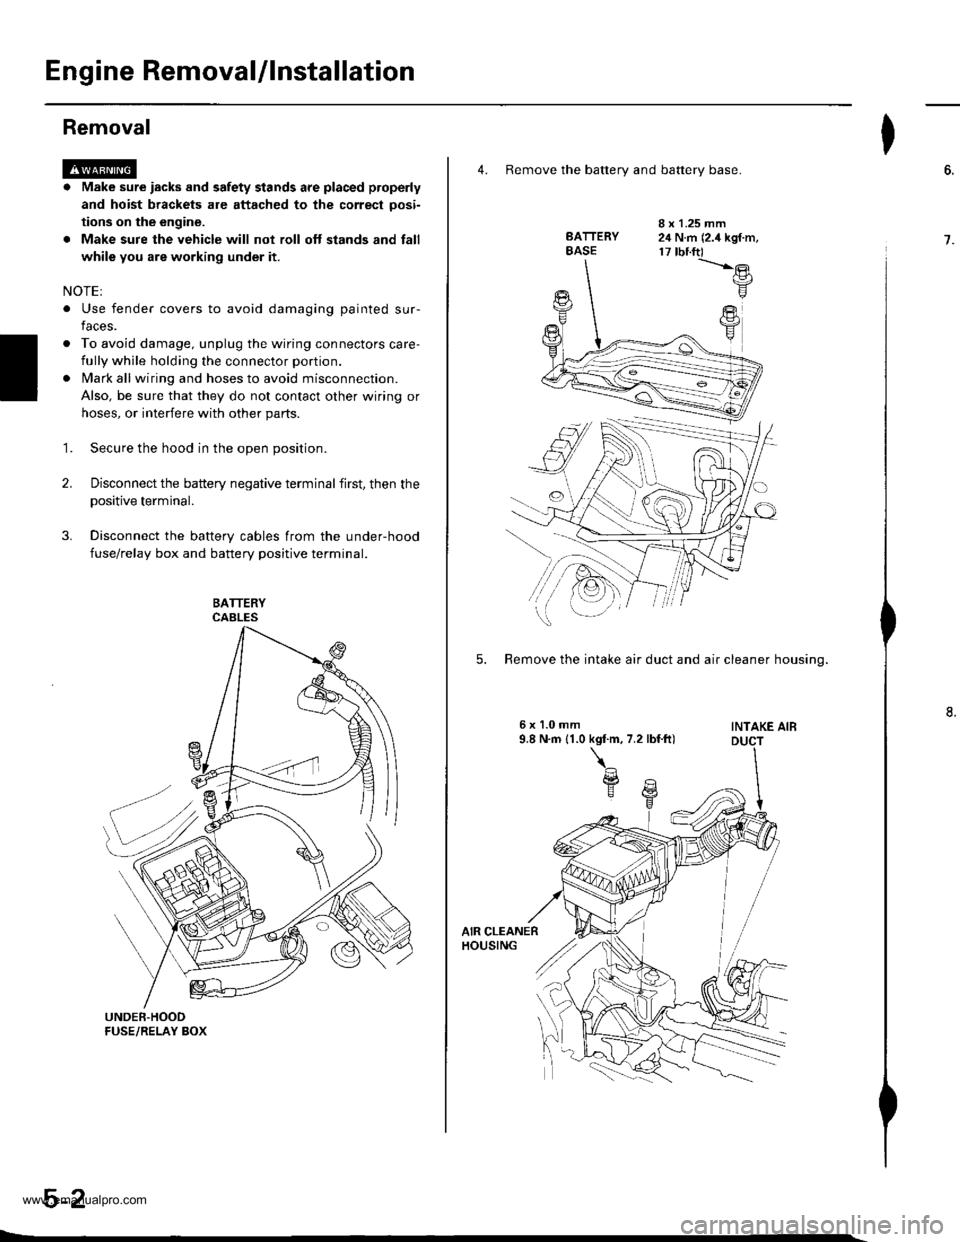 HONDA CR-V 1998 RD1-RD3 / 1.G User Guide 
Engine RemovaUlnstallation
Removal
@a Make sure iacks and safety stands are placed properly
and hoist brackets are attached to the correct oosi-
tions on the engine.
. Make sure the vehicle will not 